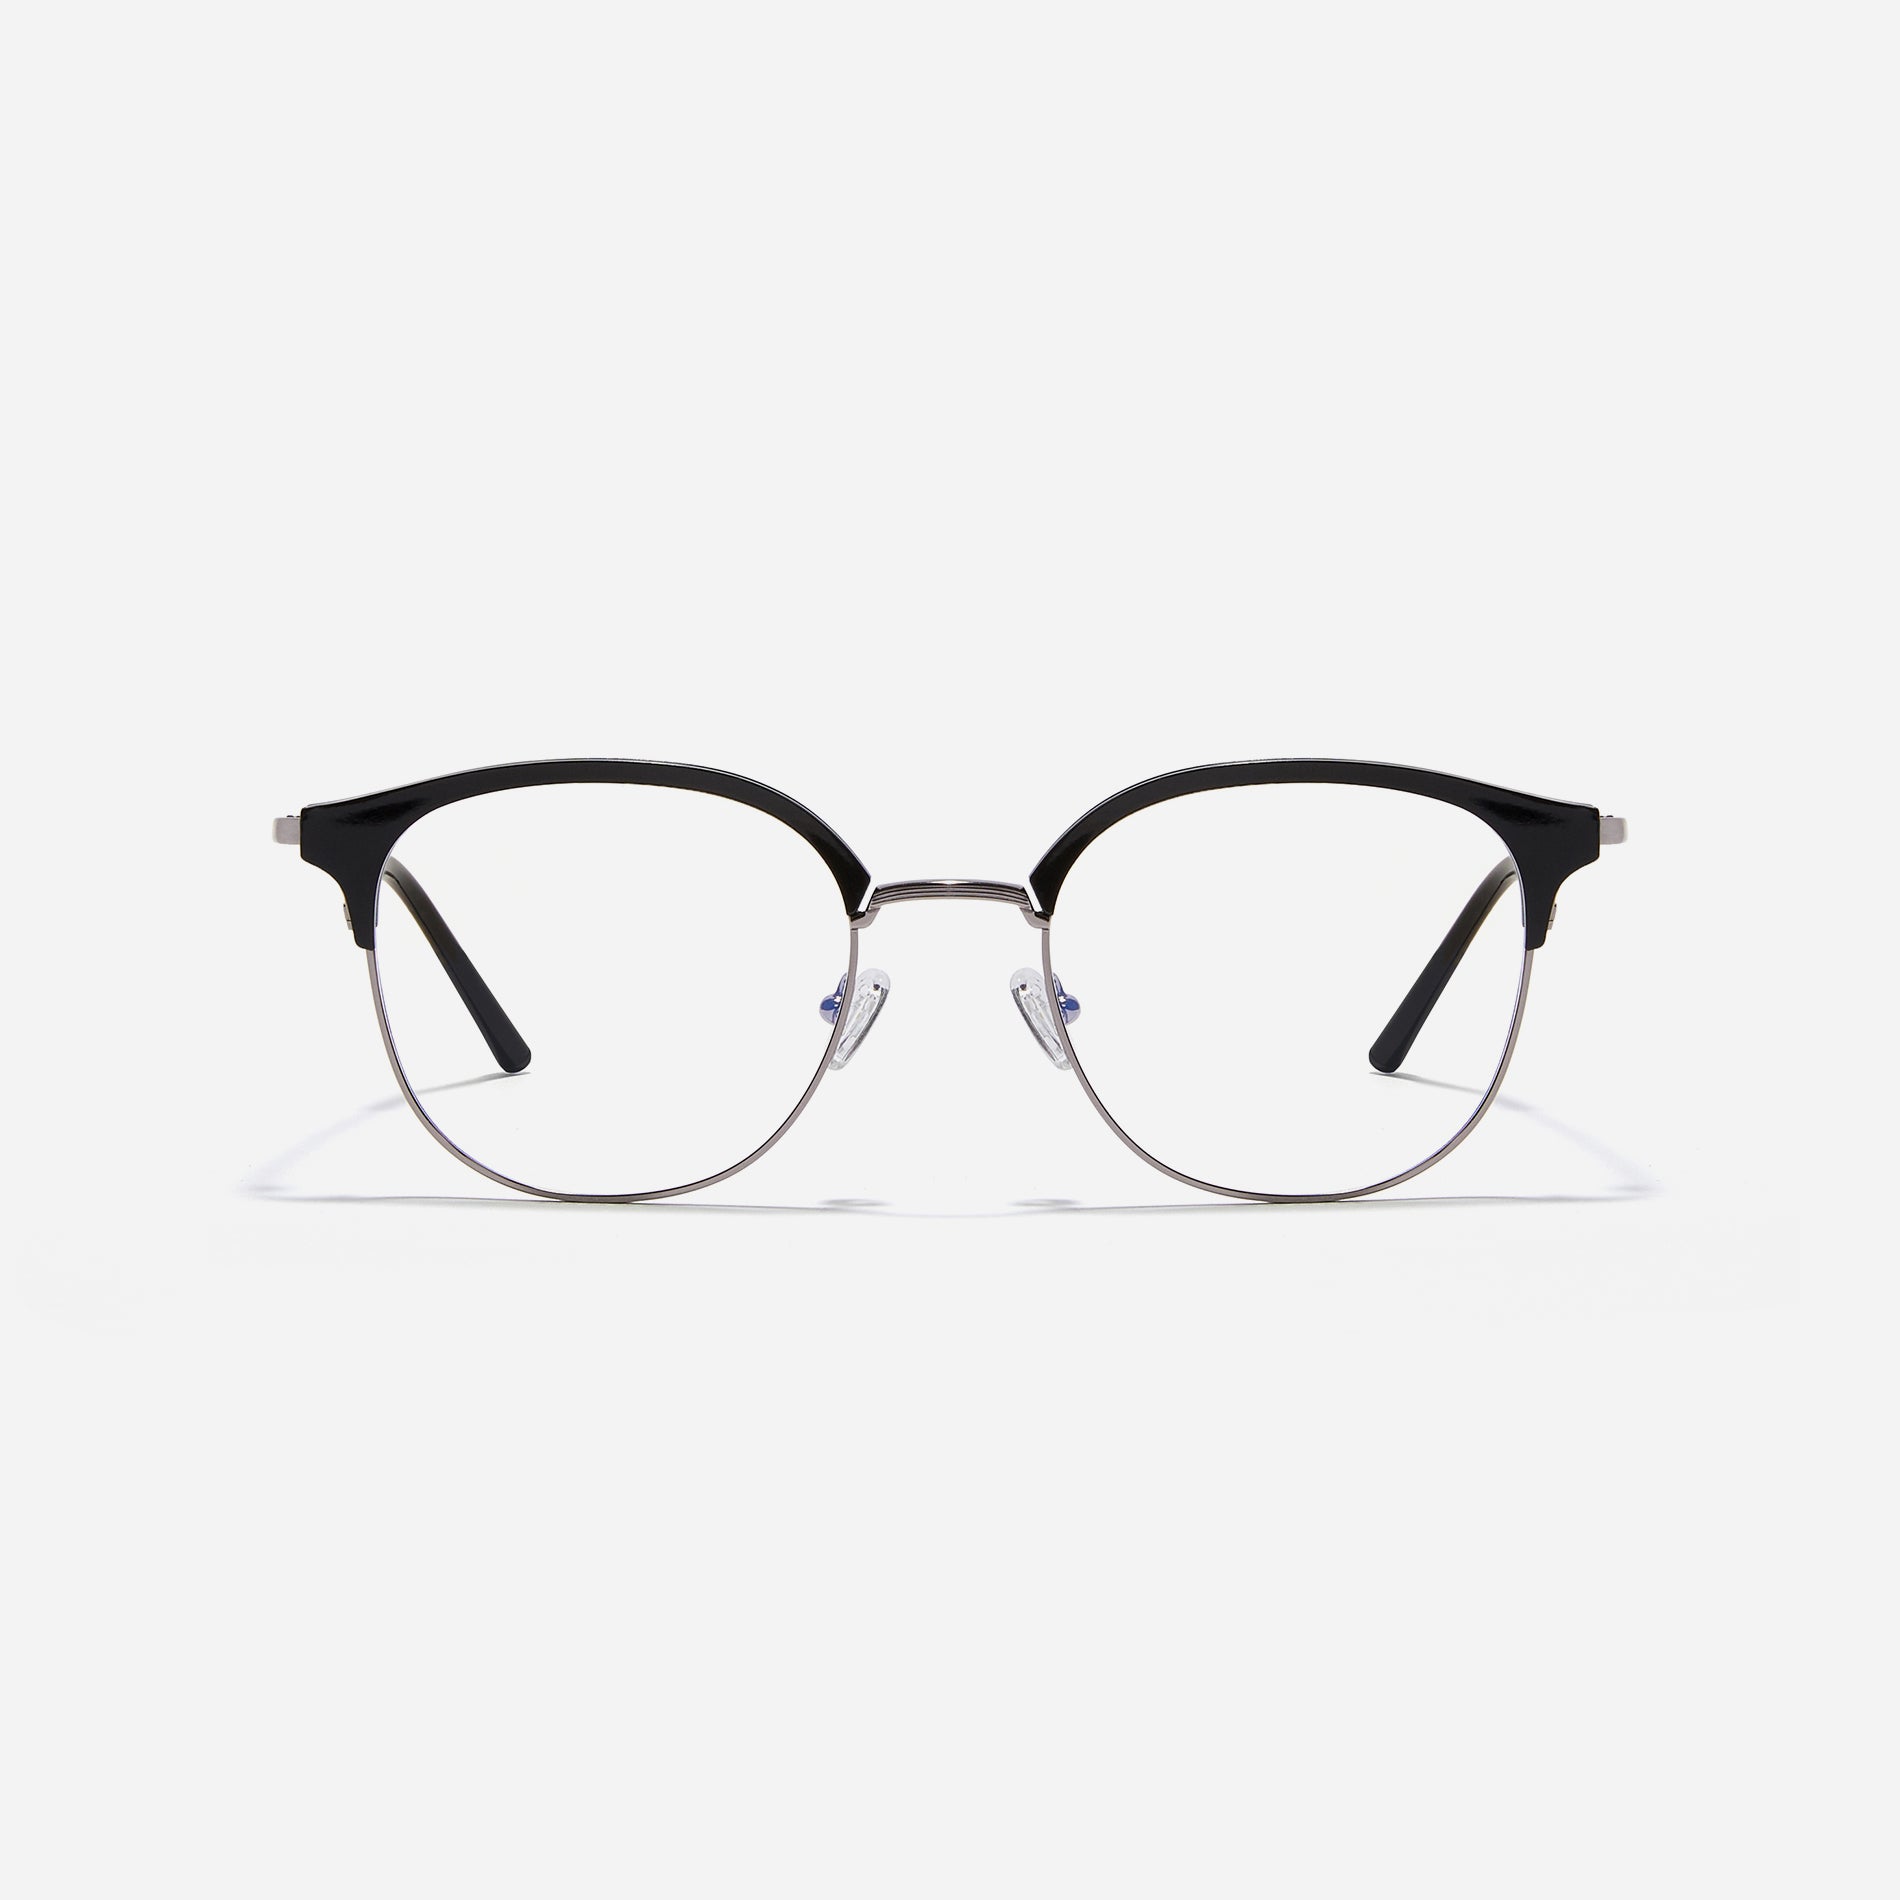 Oversized, square-shaped eyeglasses with a semi-rimless structure ideal for trendy styling and versatile wear.